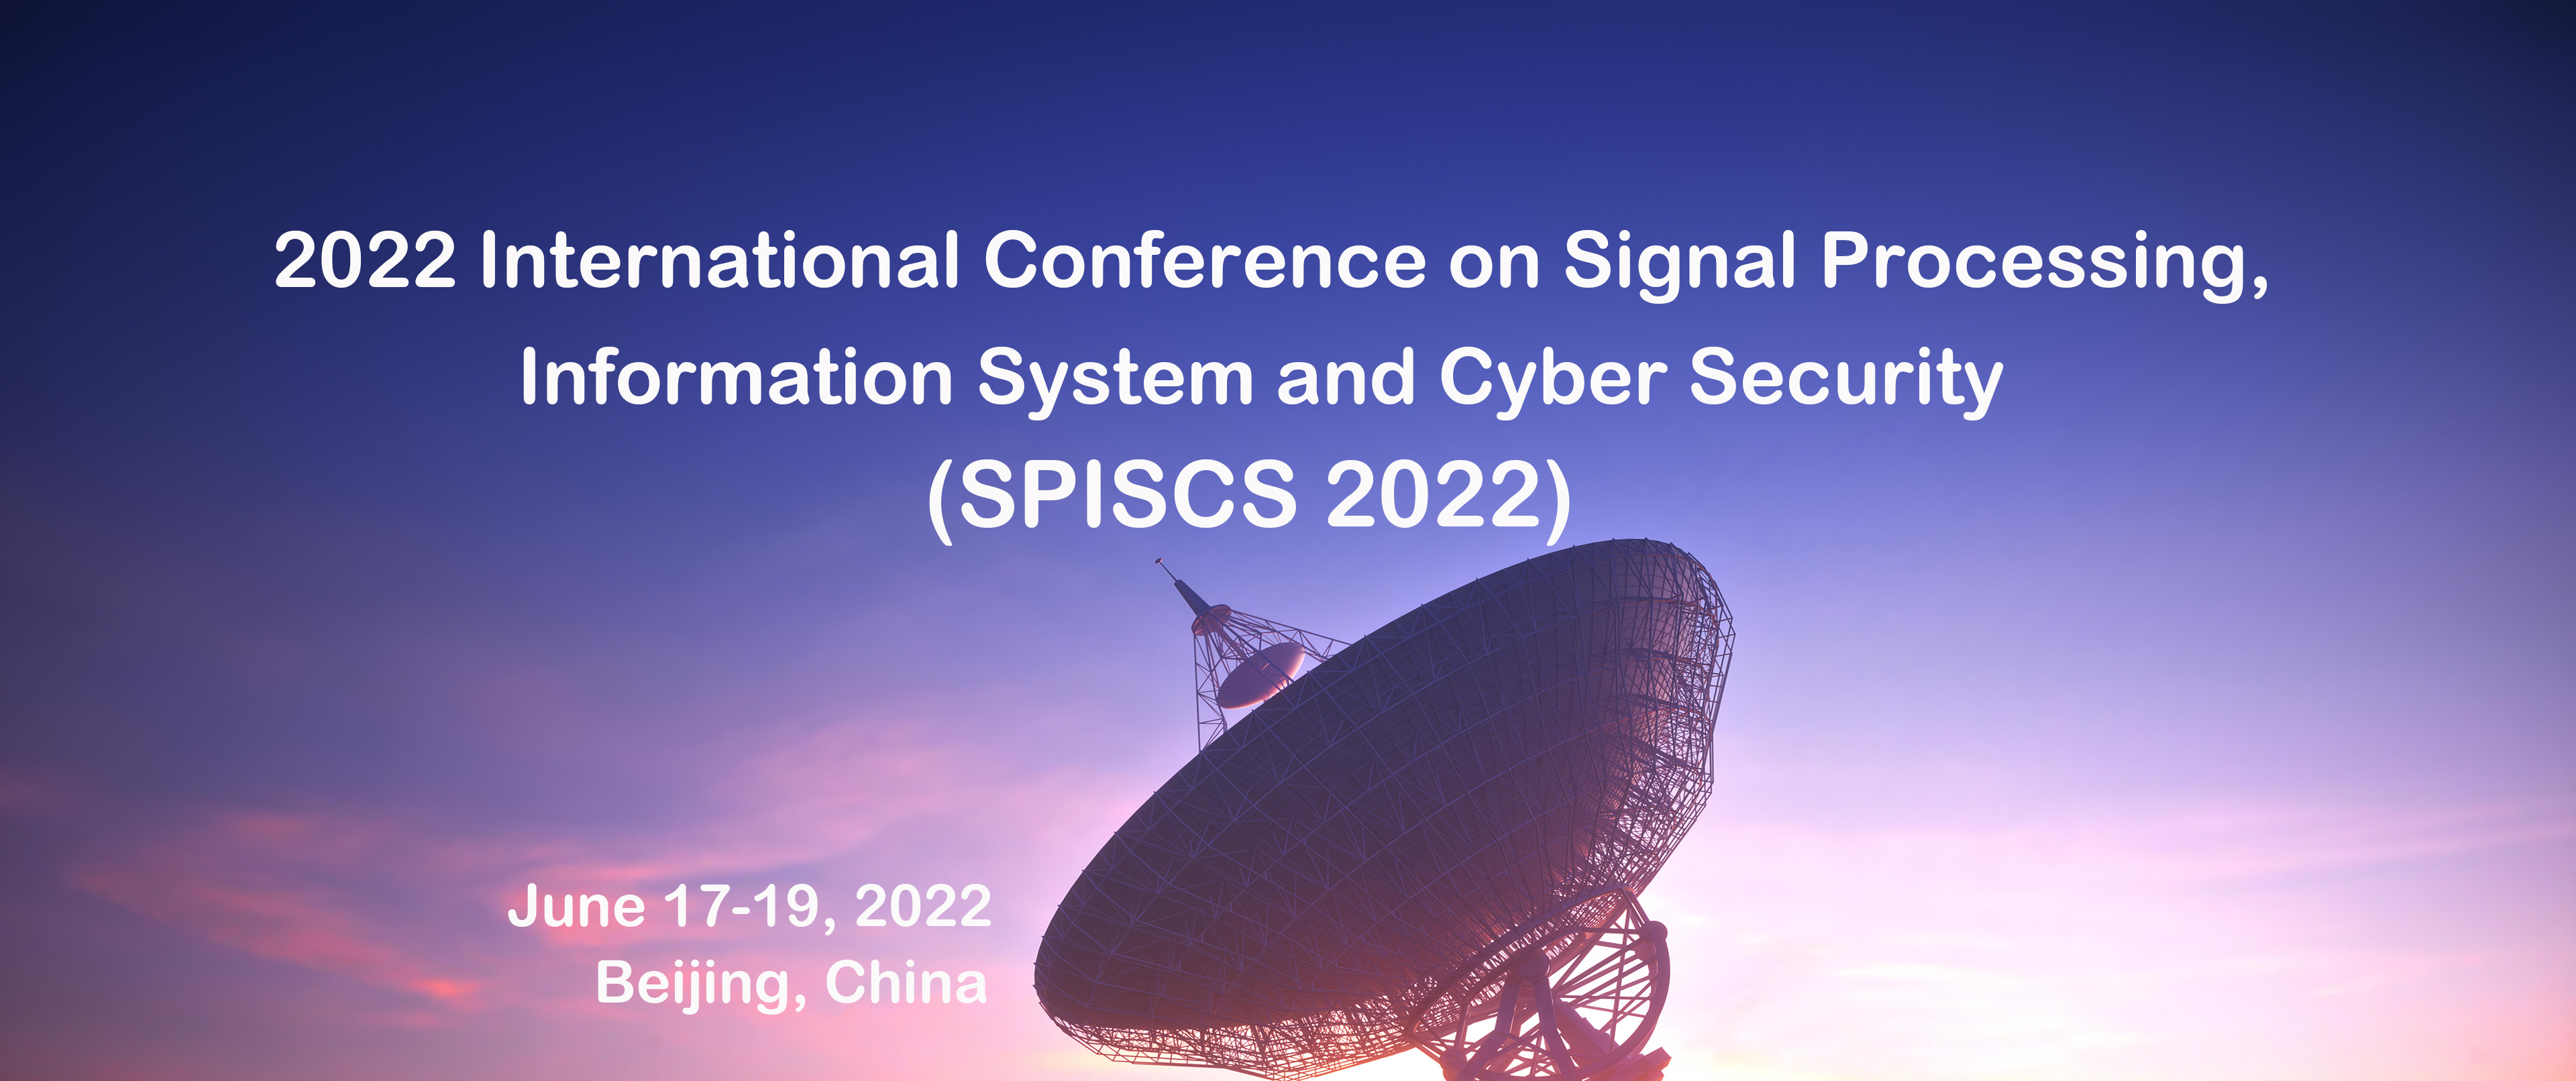 2022 International Conference on Signal Processing, Information System and Cyber Security (SPISCS 2022), Beijing, China